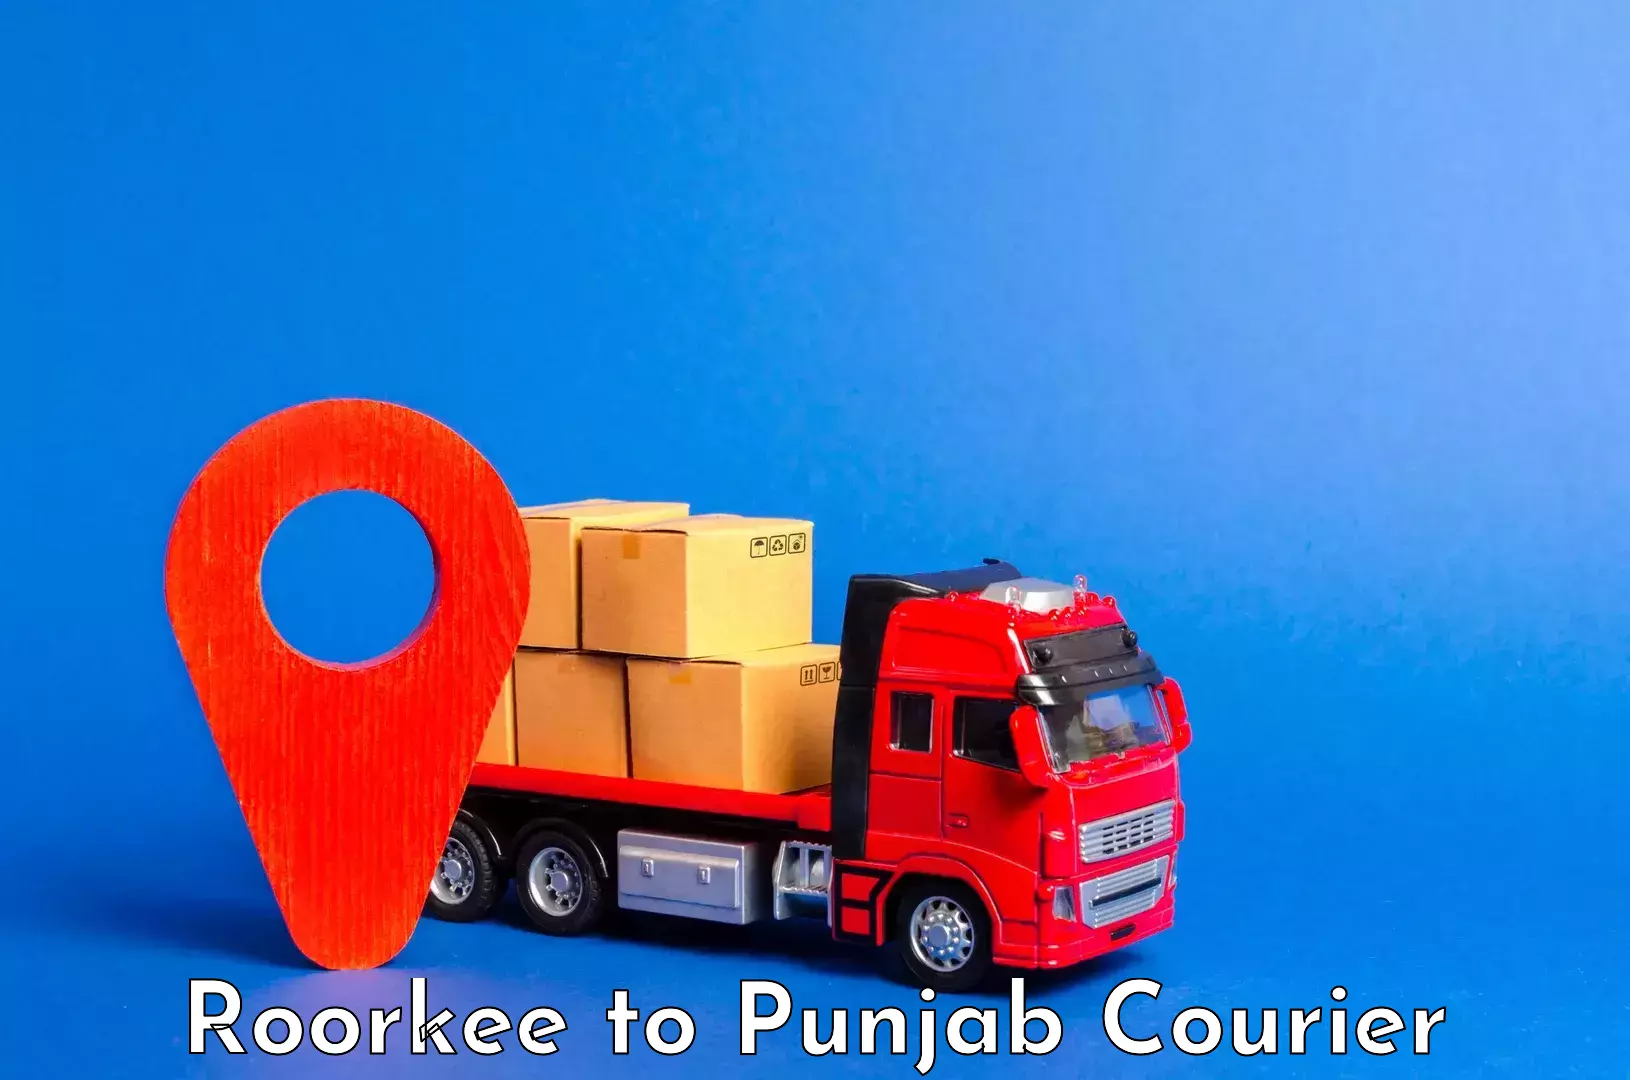 Baggage delivery technology Roorkee to Mohali